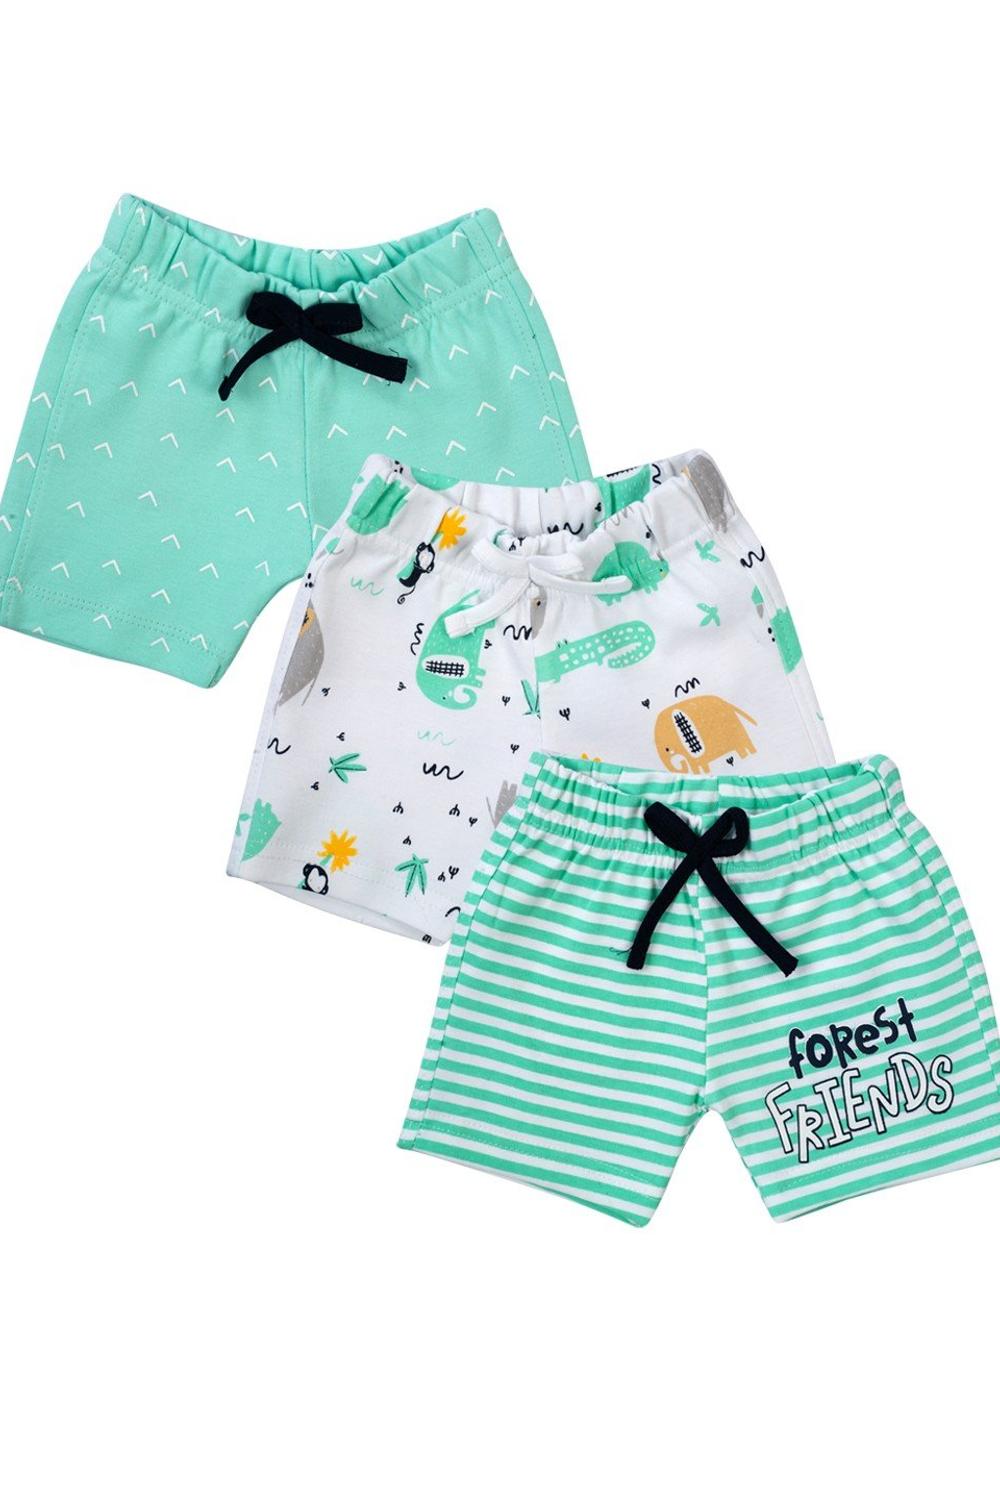 Mee Mee Shorts Pack Of 3 -White & Mint